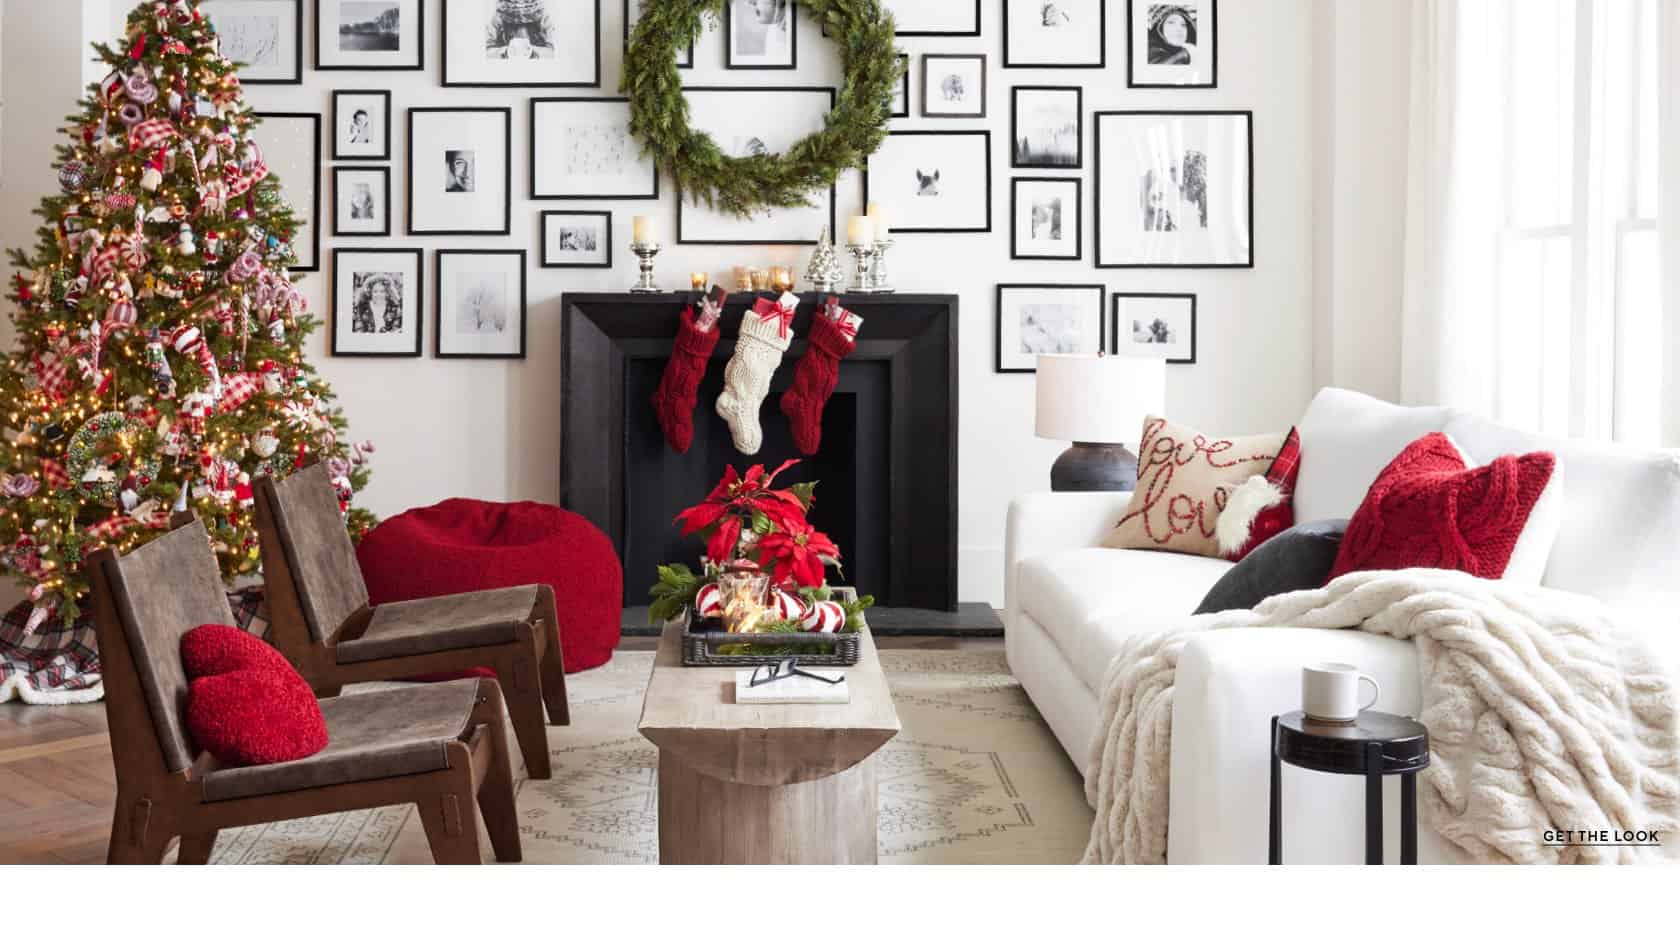 Red and white christmas living room with nostalgic accents, white furniture and a gallery wall of photos.